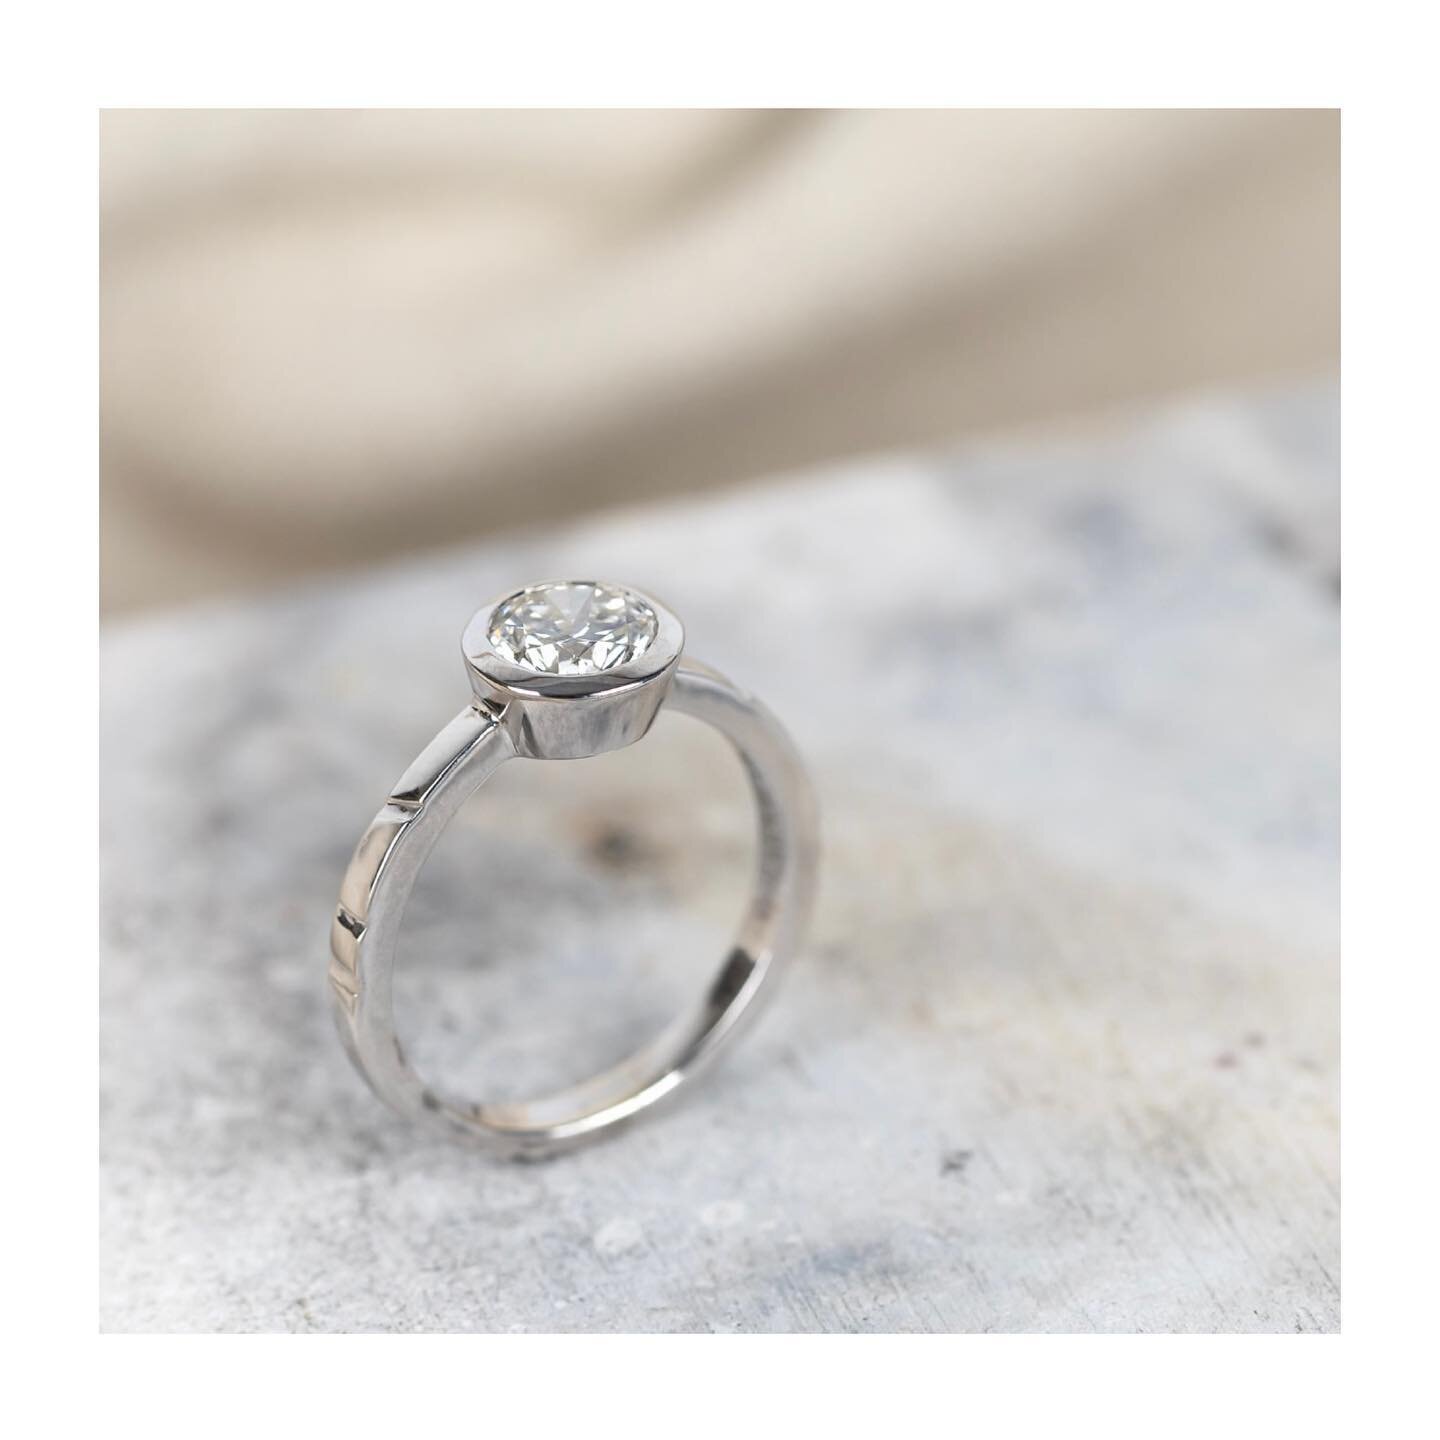 I can finally share this beautiful engagement ring commission that I completed last month. A beautiful 1.13ct lab grown diamond set into white gold. Handmade by me.

The question has been asked, and the lovely recipient said YES! A big congratulation